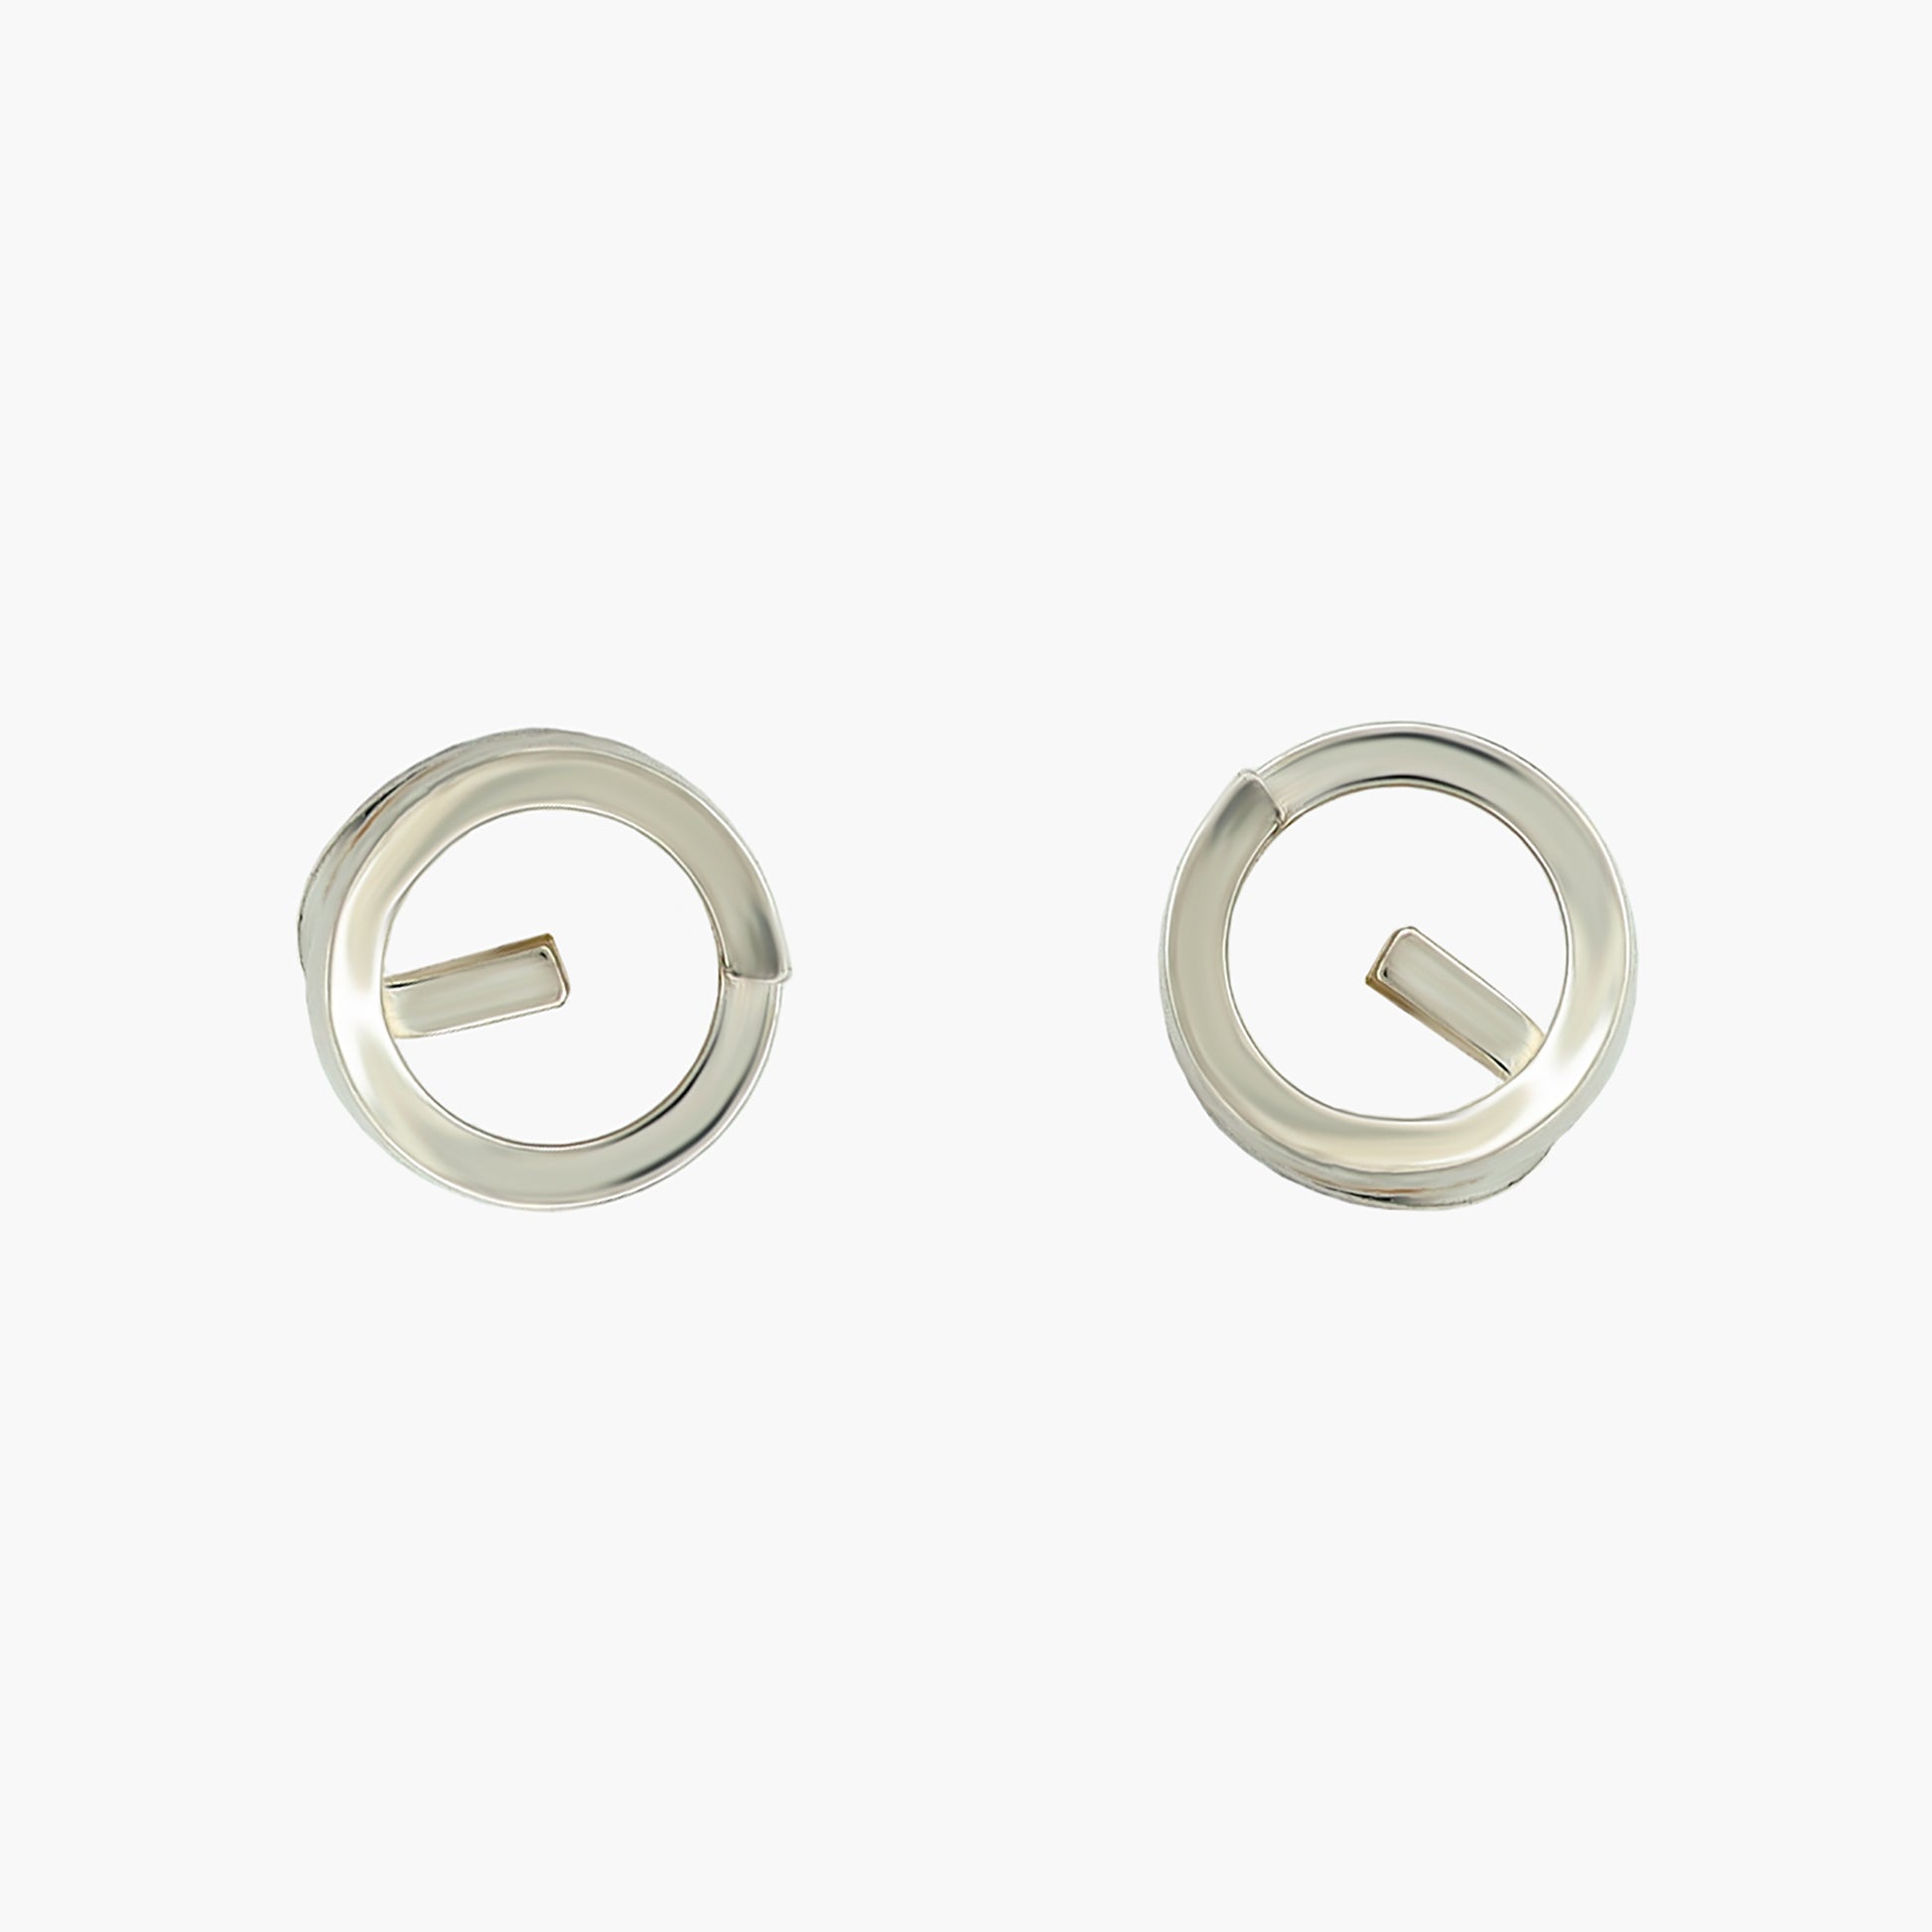 One pair of small sterling silver stud earrings by Dorothée Rosen, made from a coil of square wire to inspire the idea of a clock face. The earrings are set on a bright background.